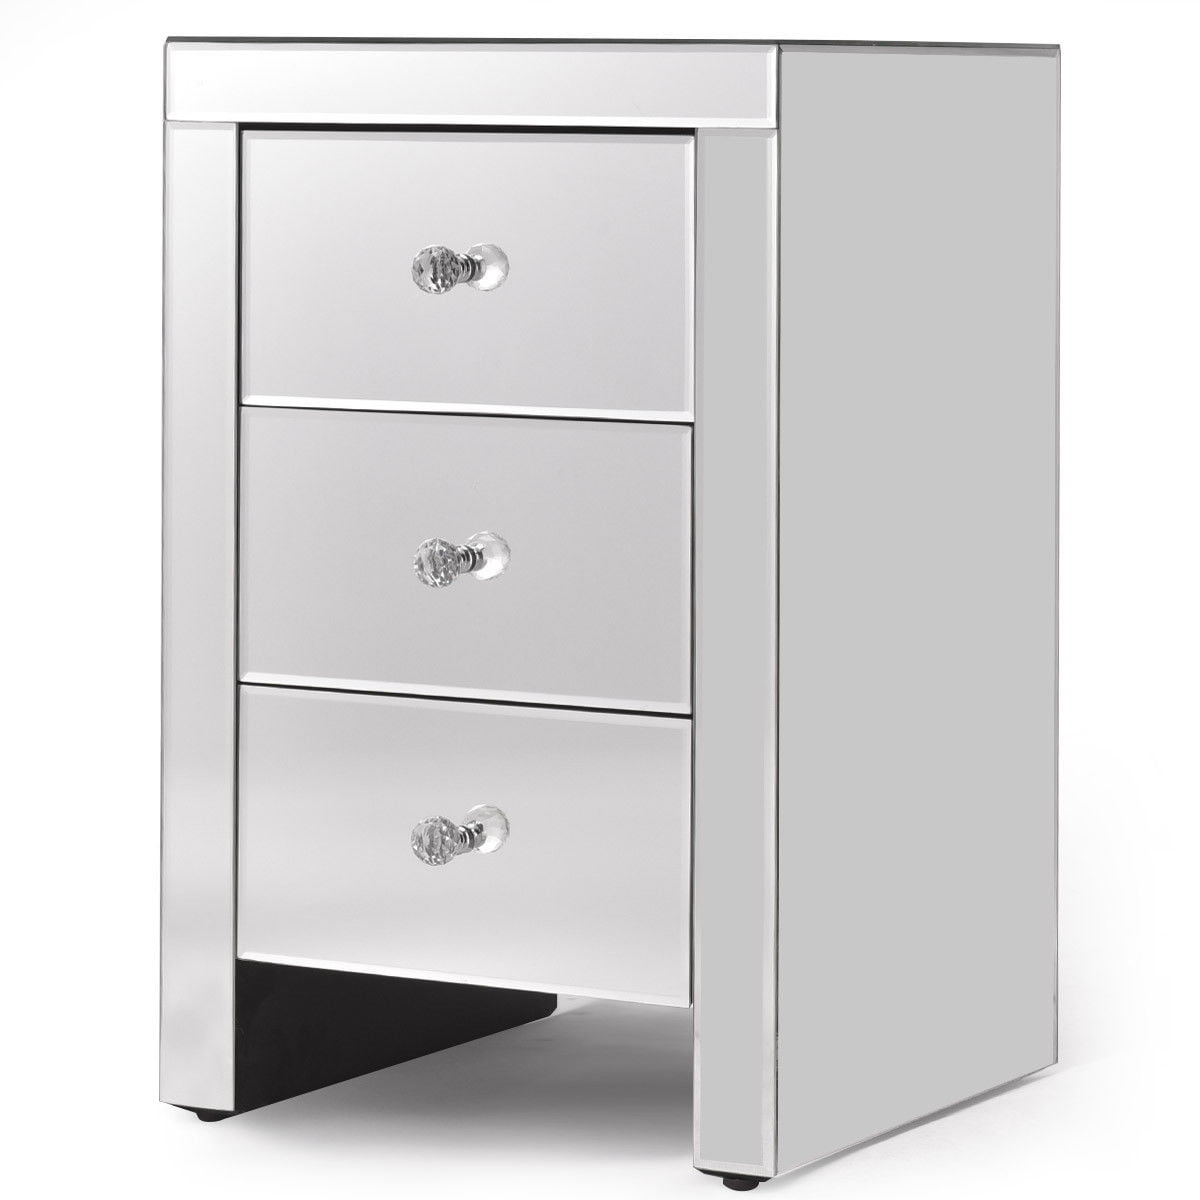 3 Drawer Mirrored Nightstand Accent Table Chest Dresser Storage Silver Glass